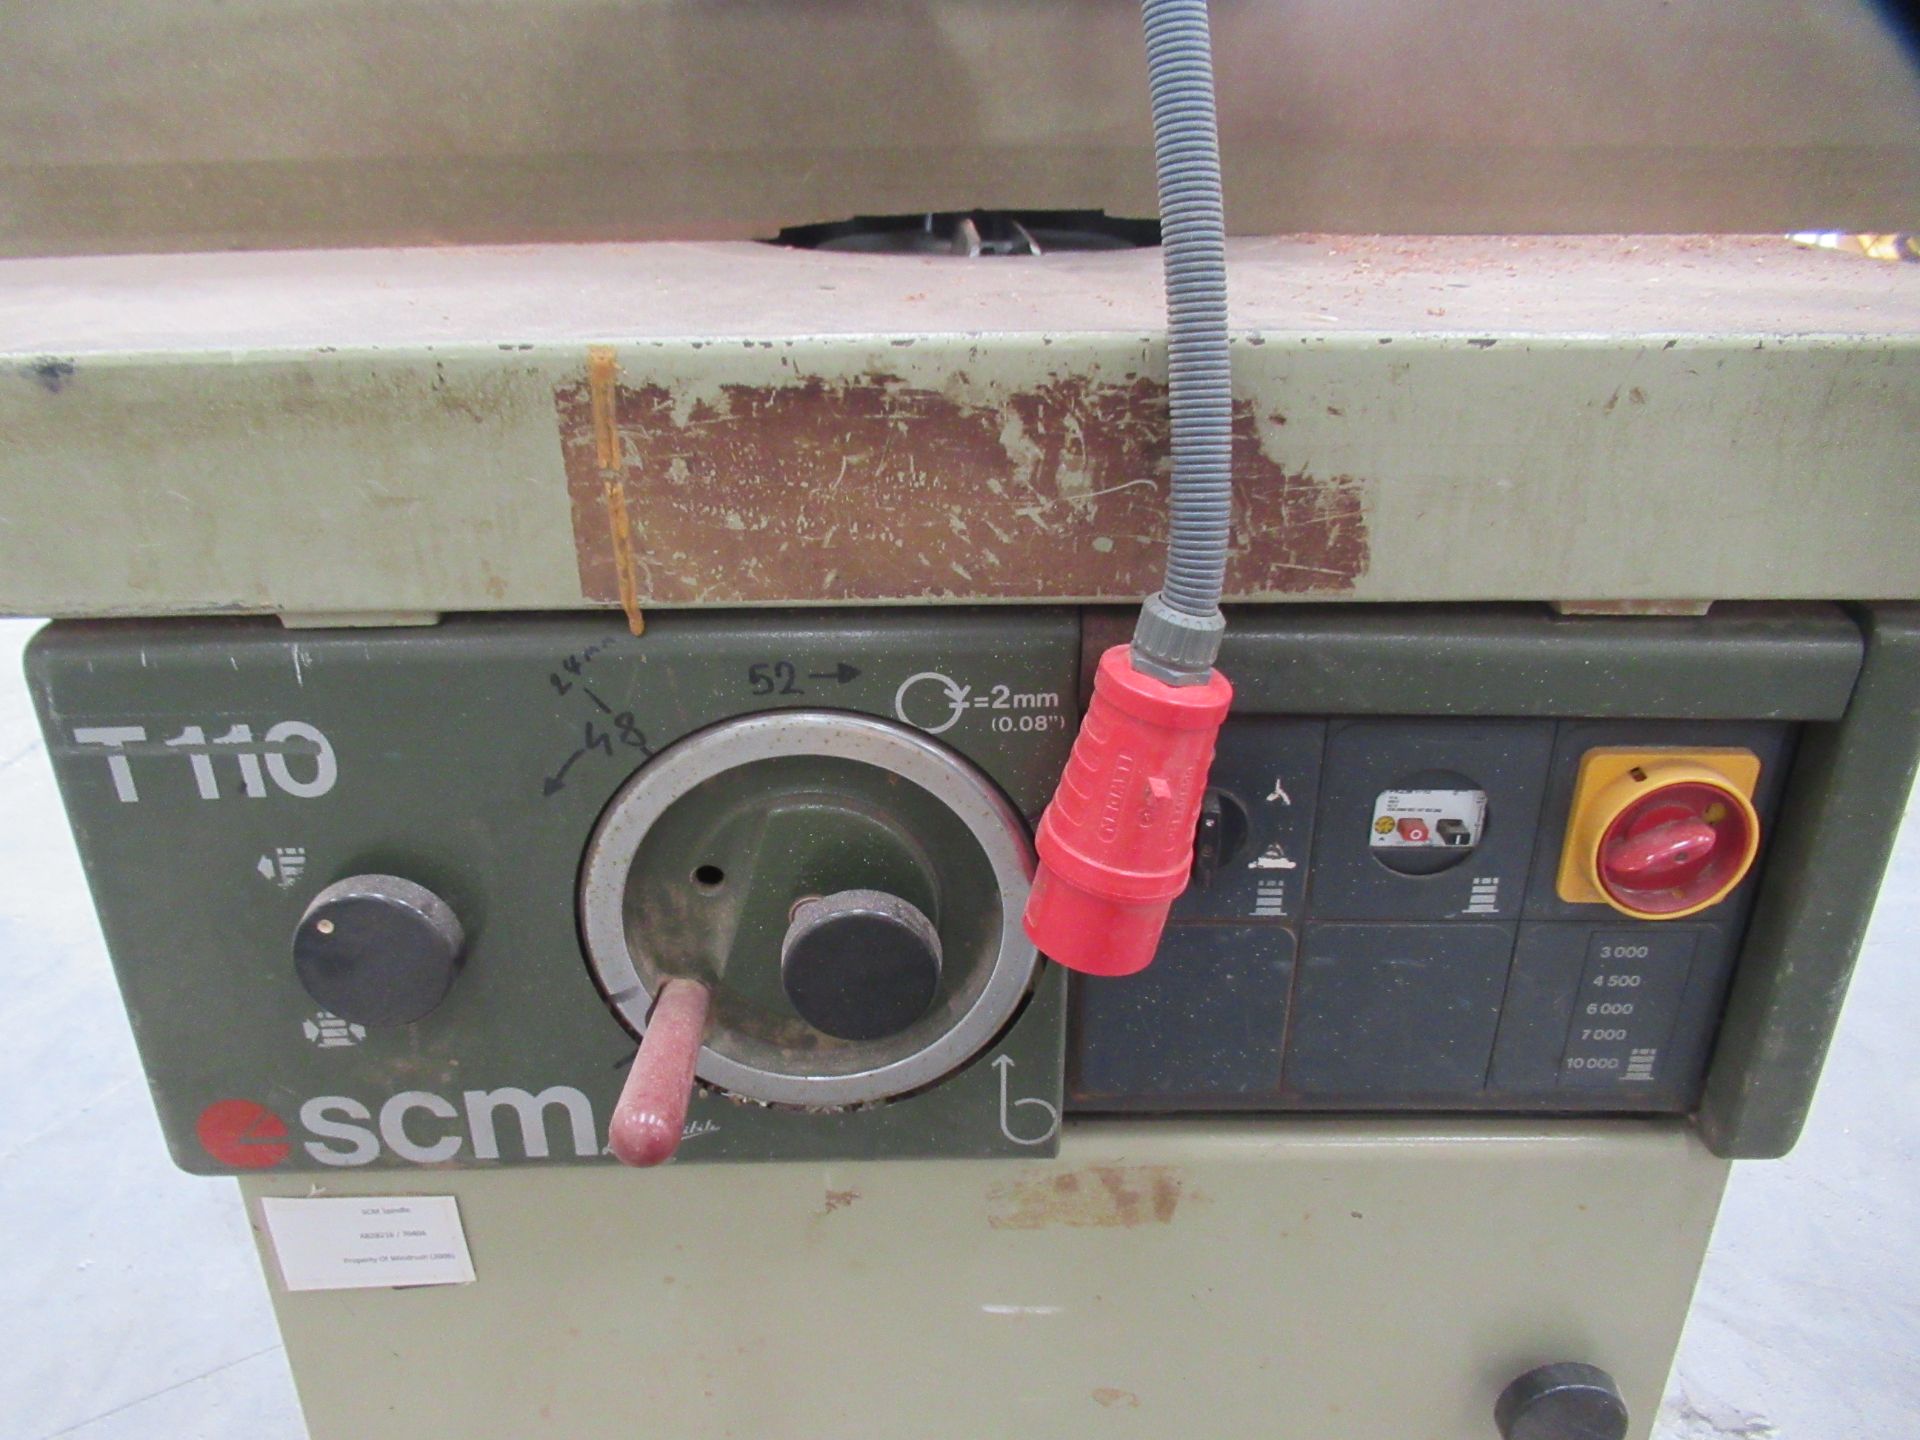 SCM T110 Spindle Moulder with Whitehall Moulding Head - Image 8 of 8